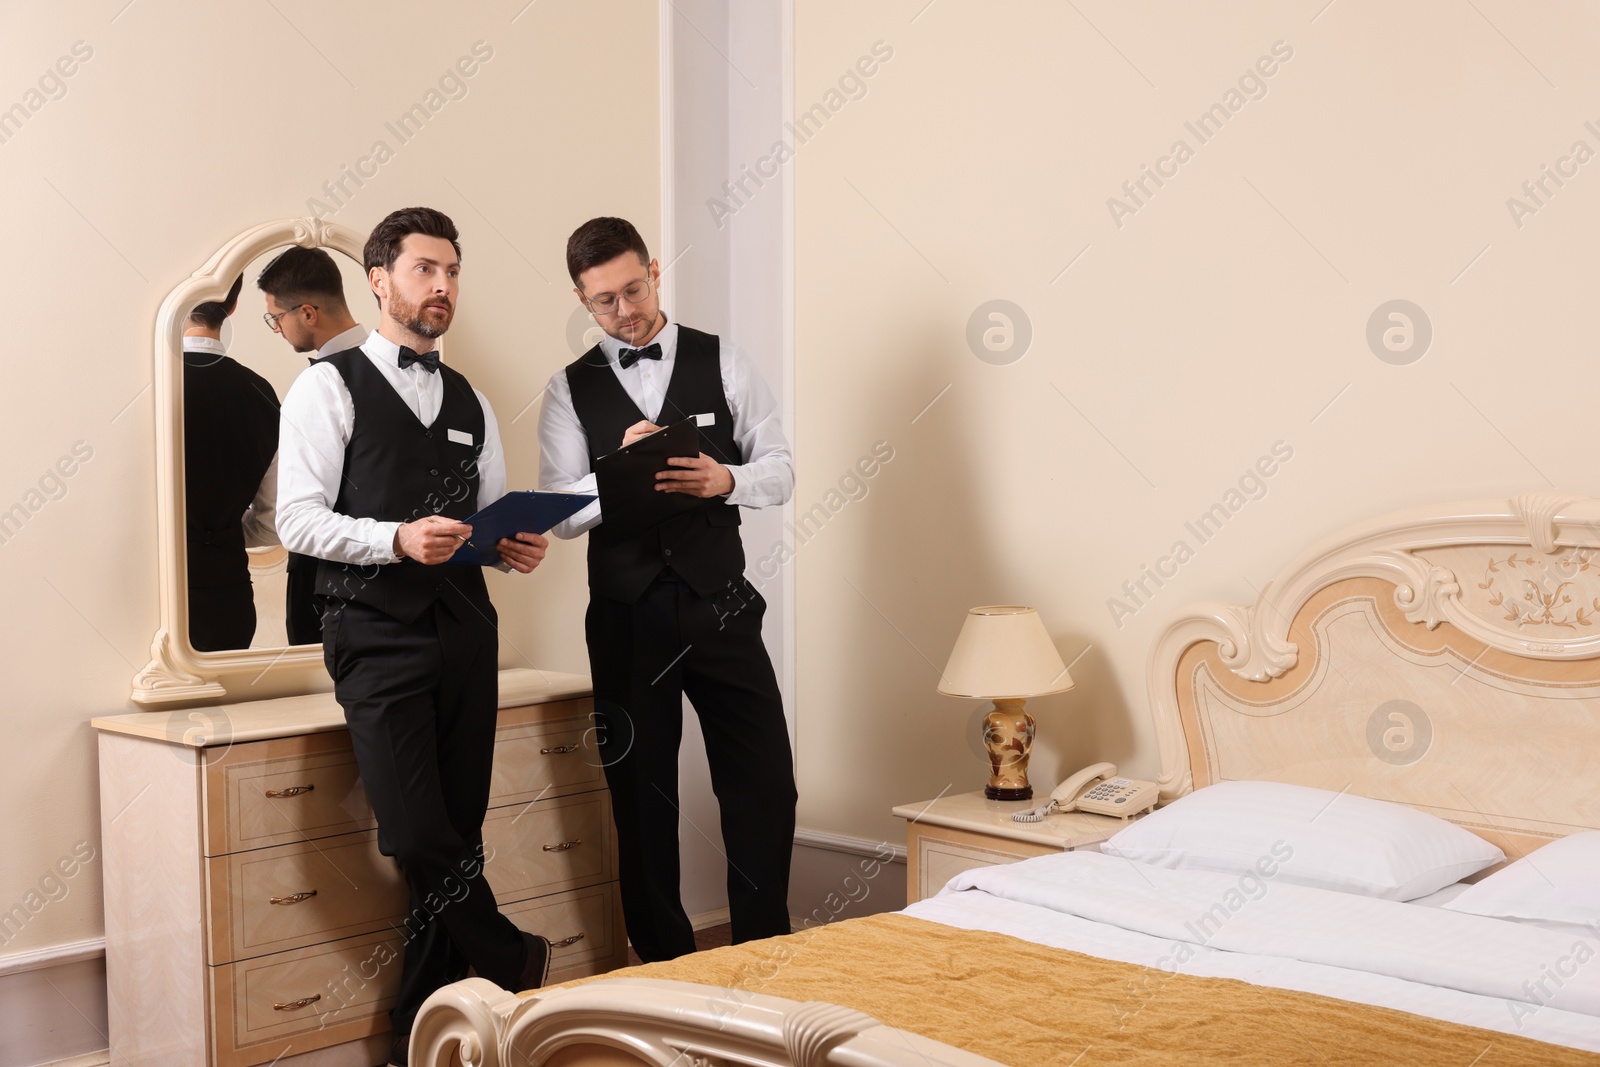 Photo of Men attending professional butler courses in hotel